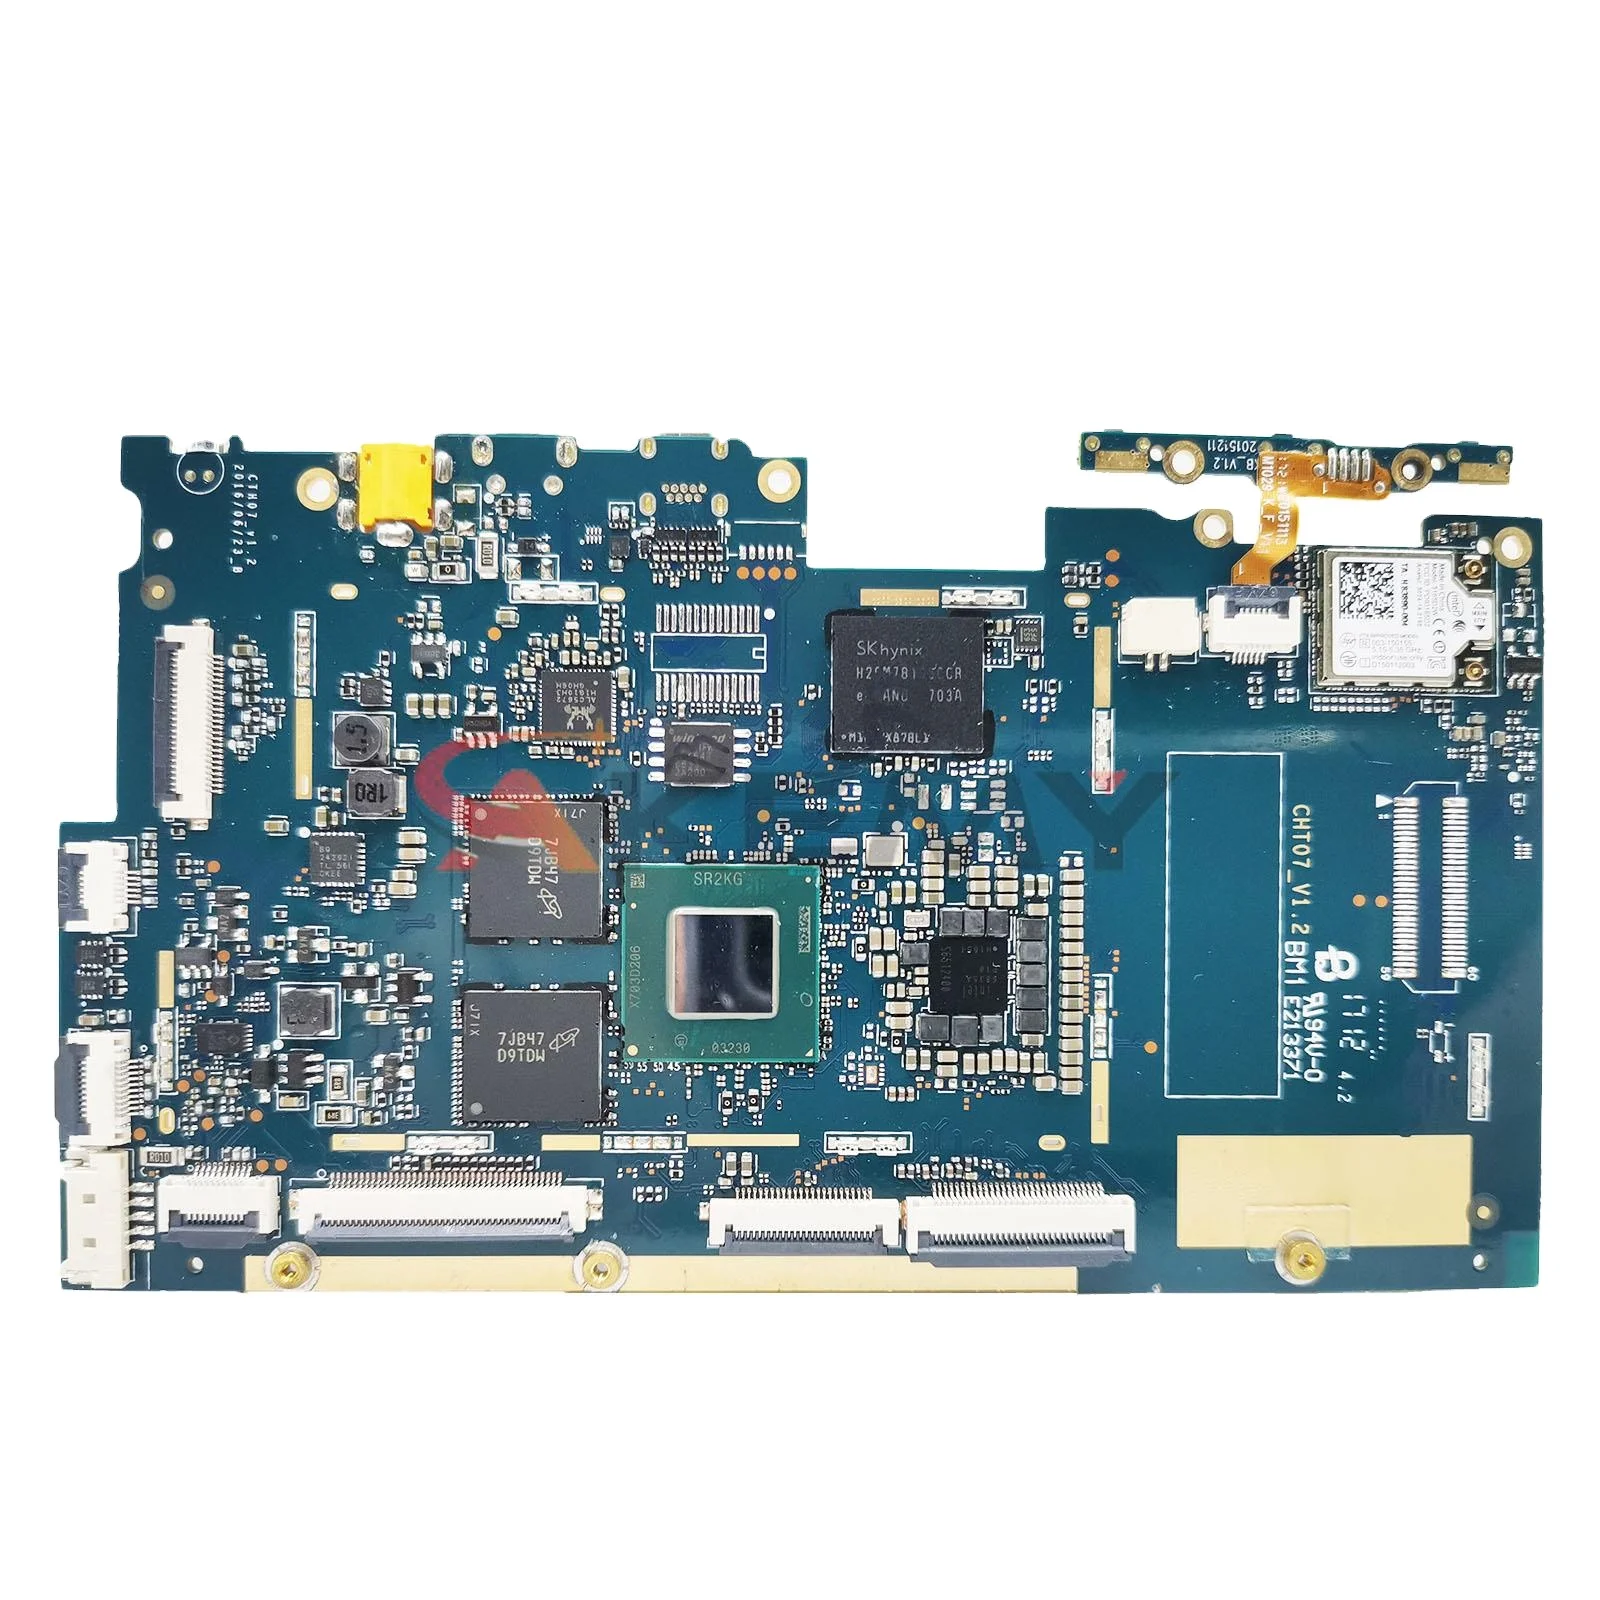 

Miix 310-10ICR Tablet motherboard Mainboard For ideapad YF80SG CPU:Z8350 SSD:64G RAM:4GB FRU 5B20L55197 M1029CWP 100% test OK